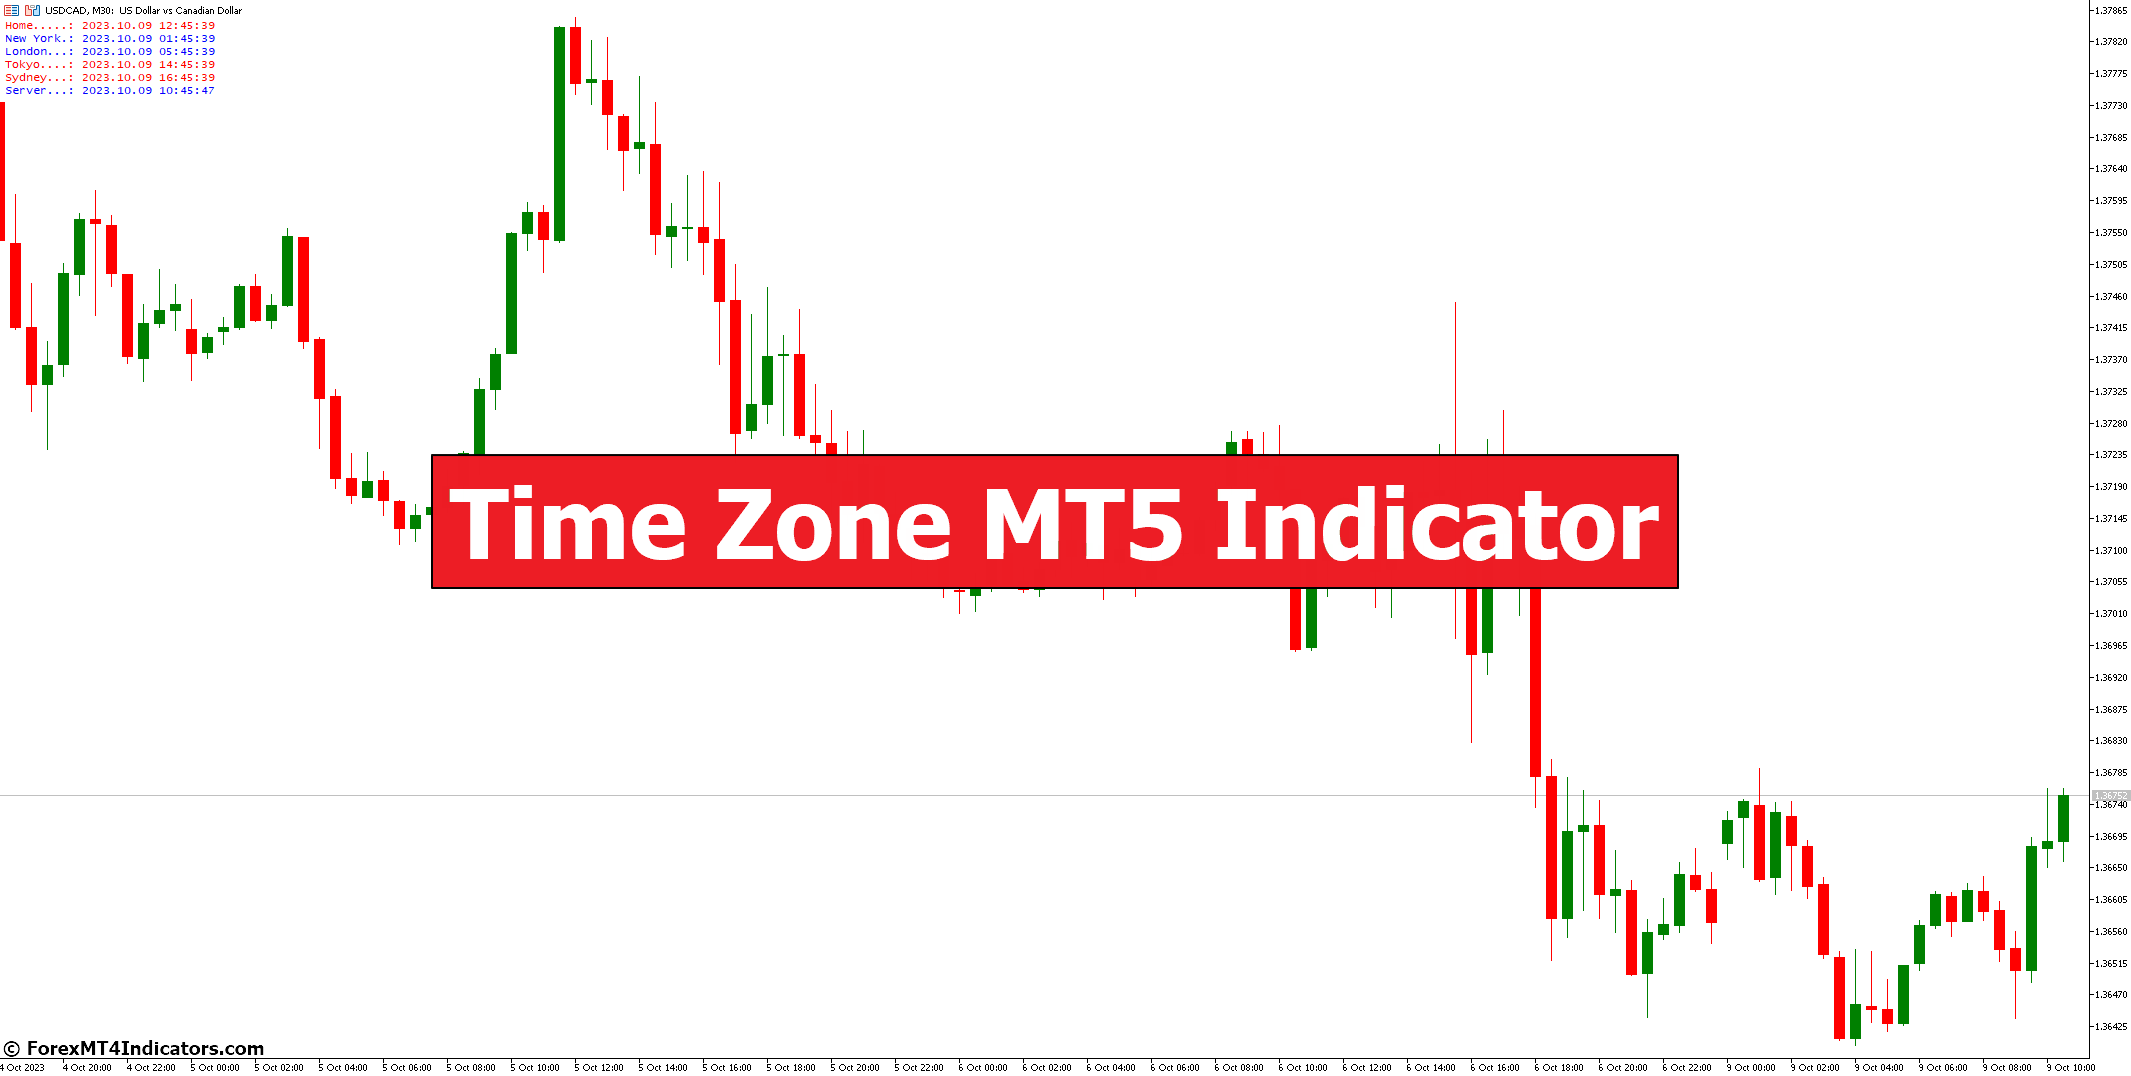 Time Zone MT5 Indicator